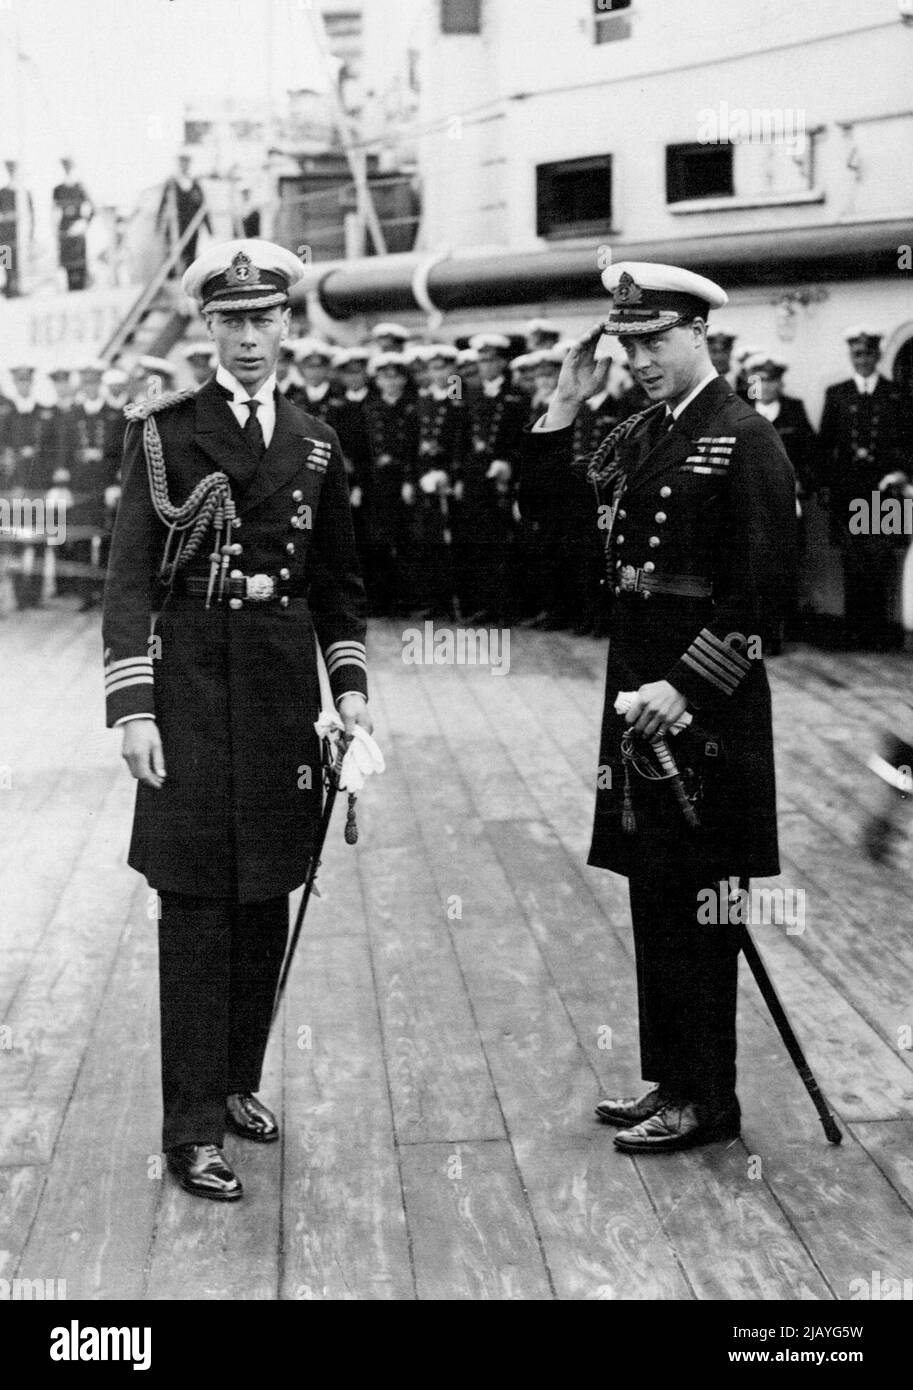 The Prince of Wales' Home Again: The Prince with his brother, the Duke of York on board H.M.S. 'Renown' on arrival at Plymouth. The Prince of Wales arrived back in London on June 22nd after his eight months tour in India, Japan, etc. January 7, 1935. (Photo by Central News). Stock Photo